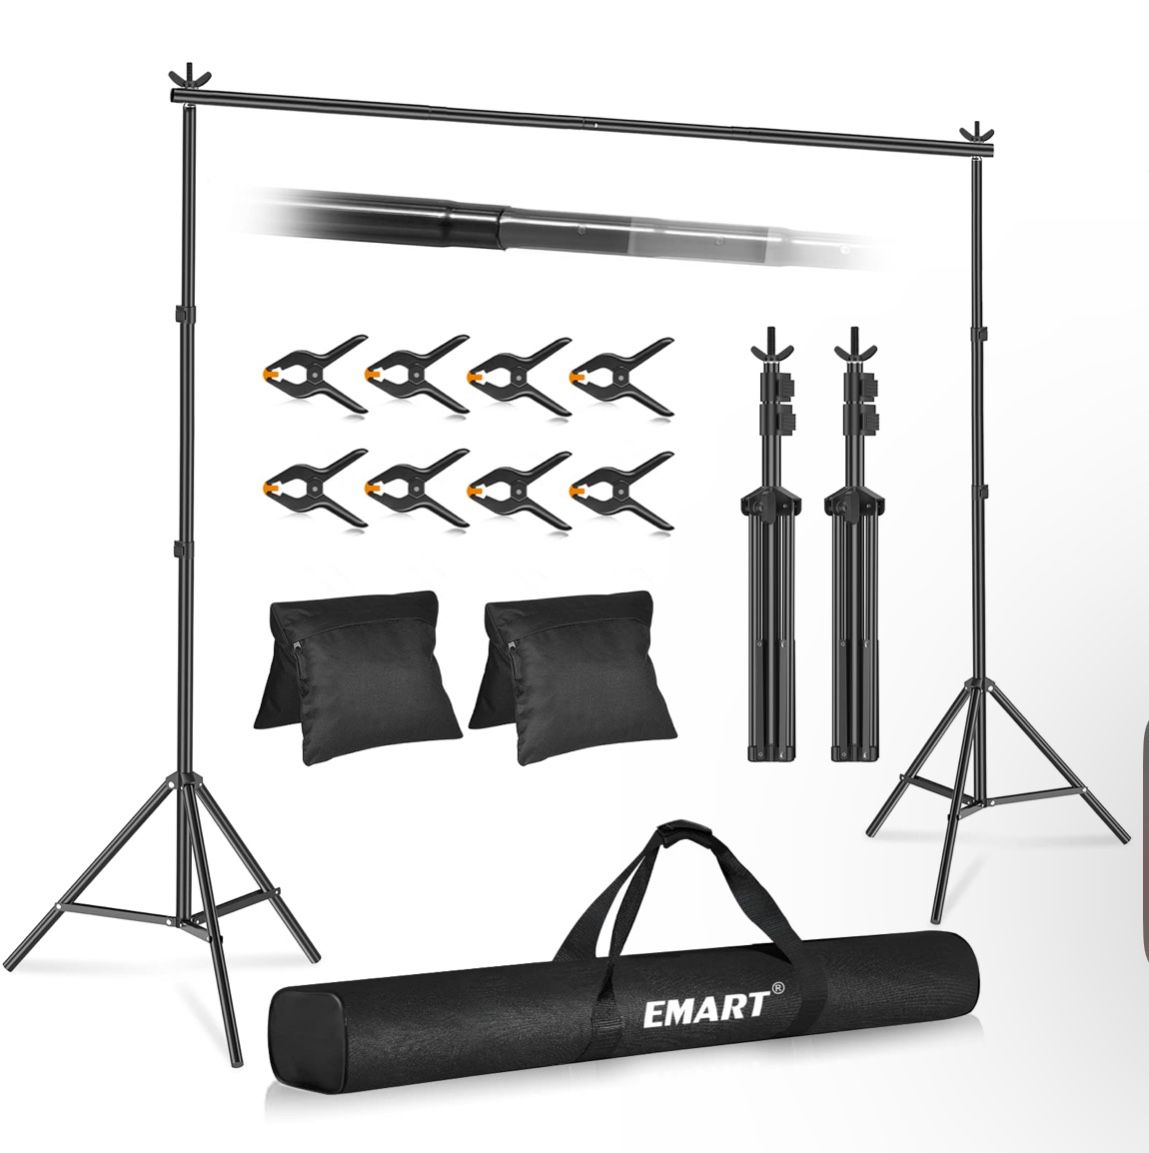 Emart Backdrop Stand 10x7ft(WxH) Photo Studio Adjustable Background Stand Support Kit with 2 Crossbars, 8 Backdrop Clamps, 2 Sandbags and Carrying Bag